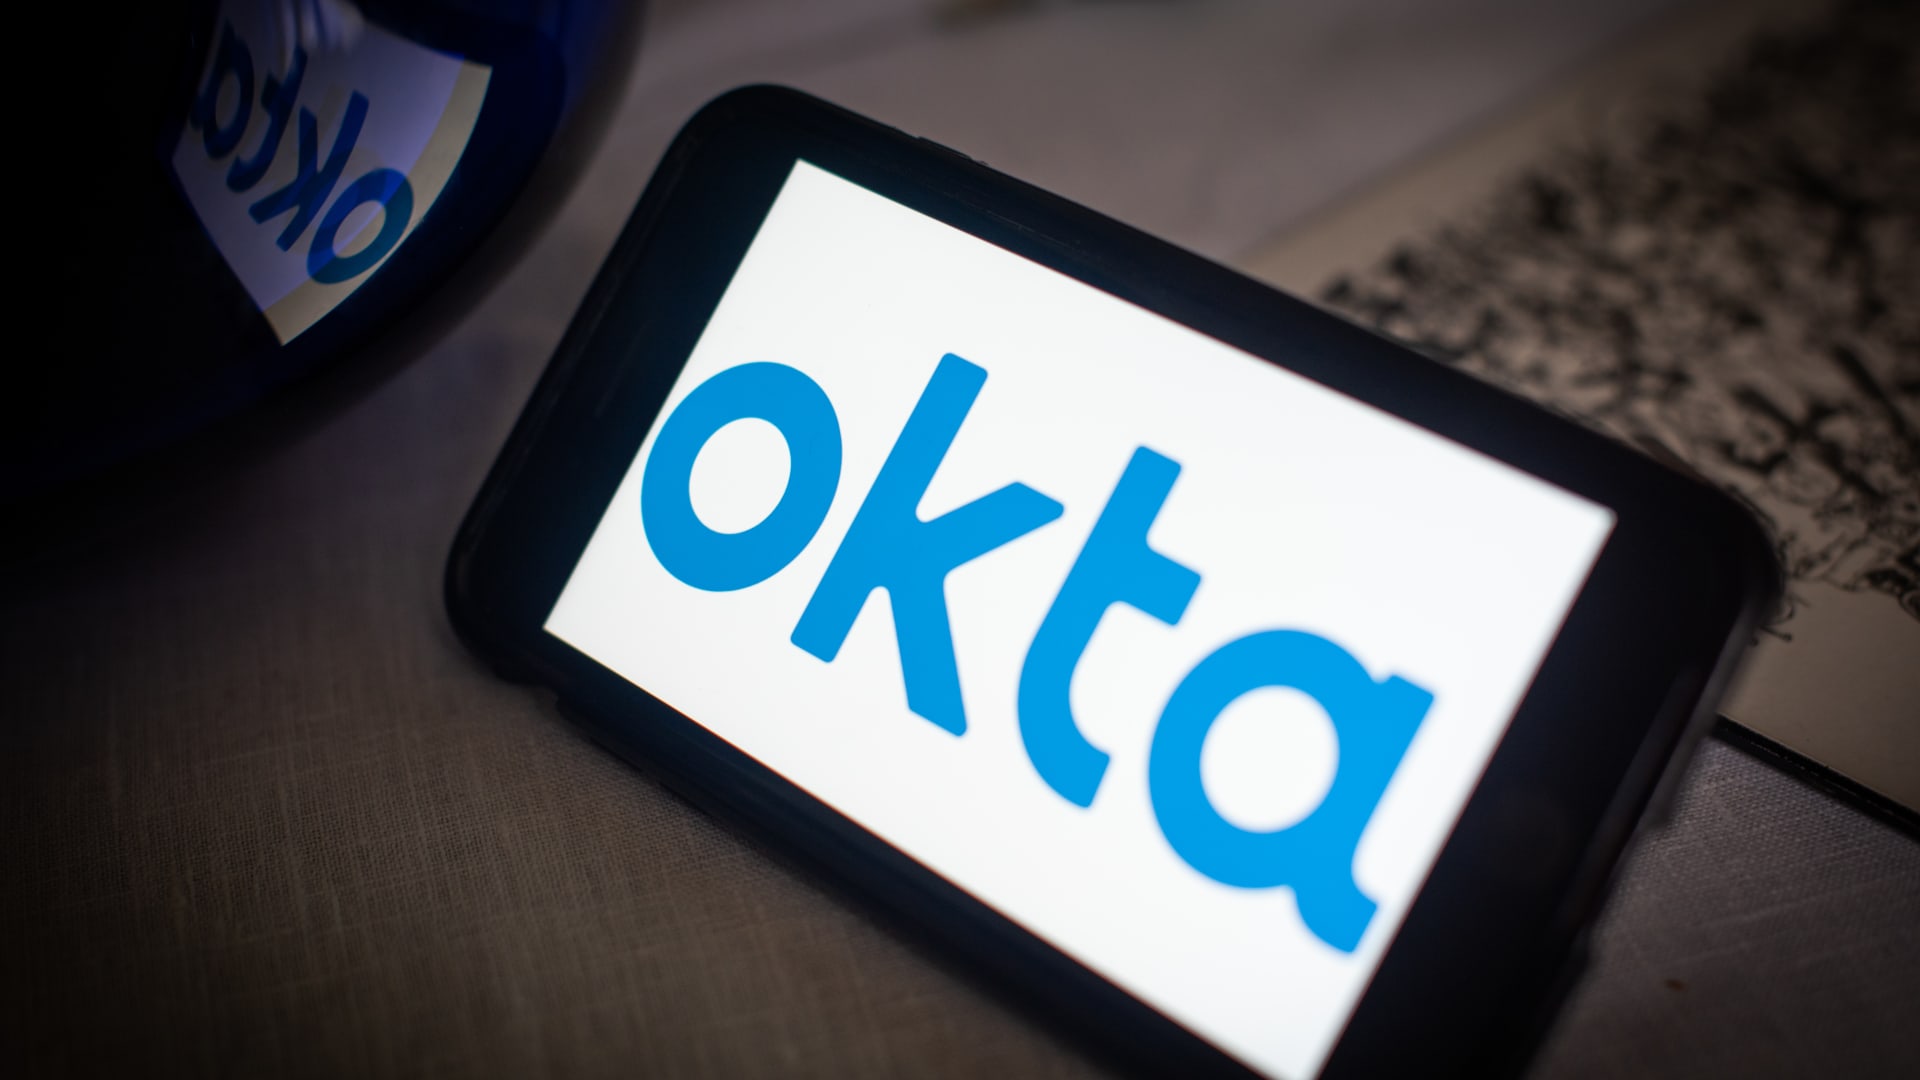 Okta stock falls after company says client files accessed by hackers via support system